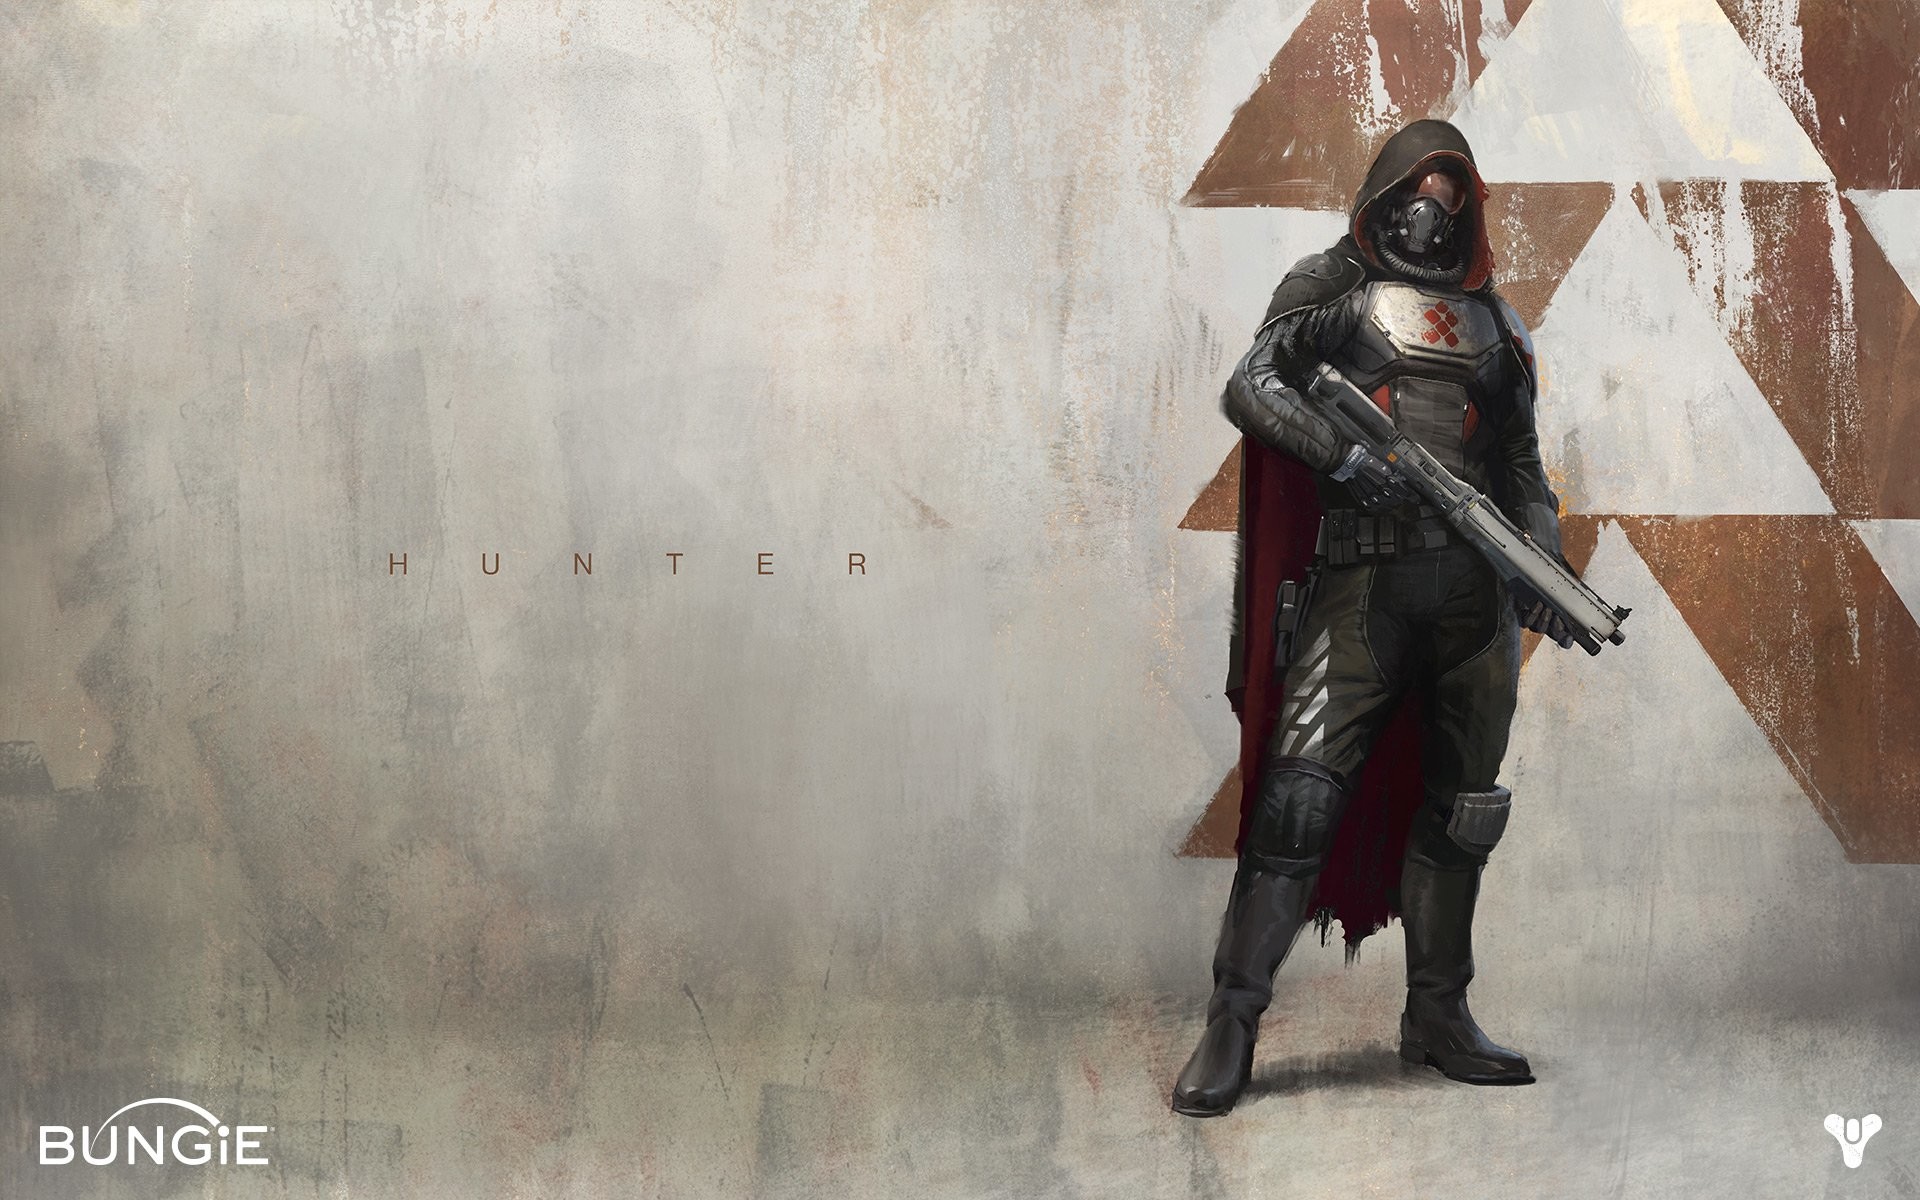 Featured image of post 1080P Hunter Destiny 2 Wallpaper Hunter video games destiny 2 hd wallpaper posted in military wallpapers category and wallpaper original resolution is 1920x1080 px